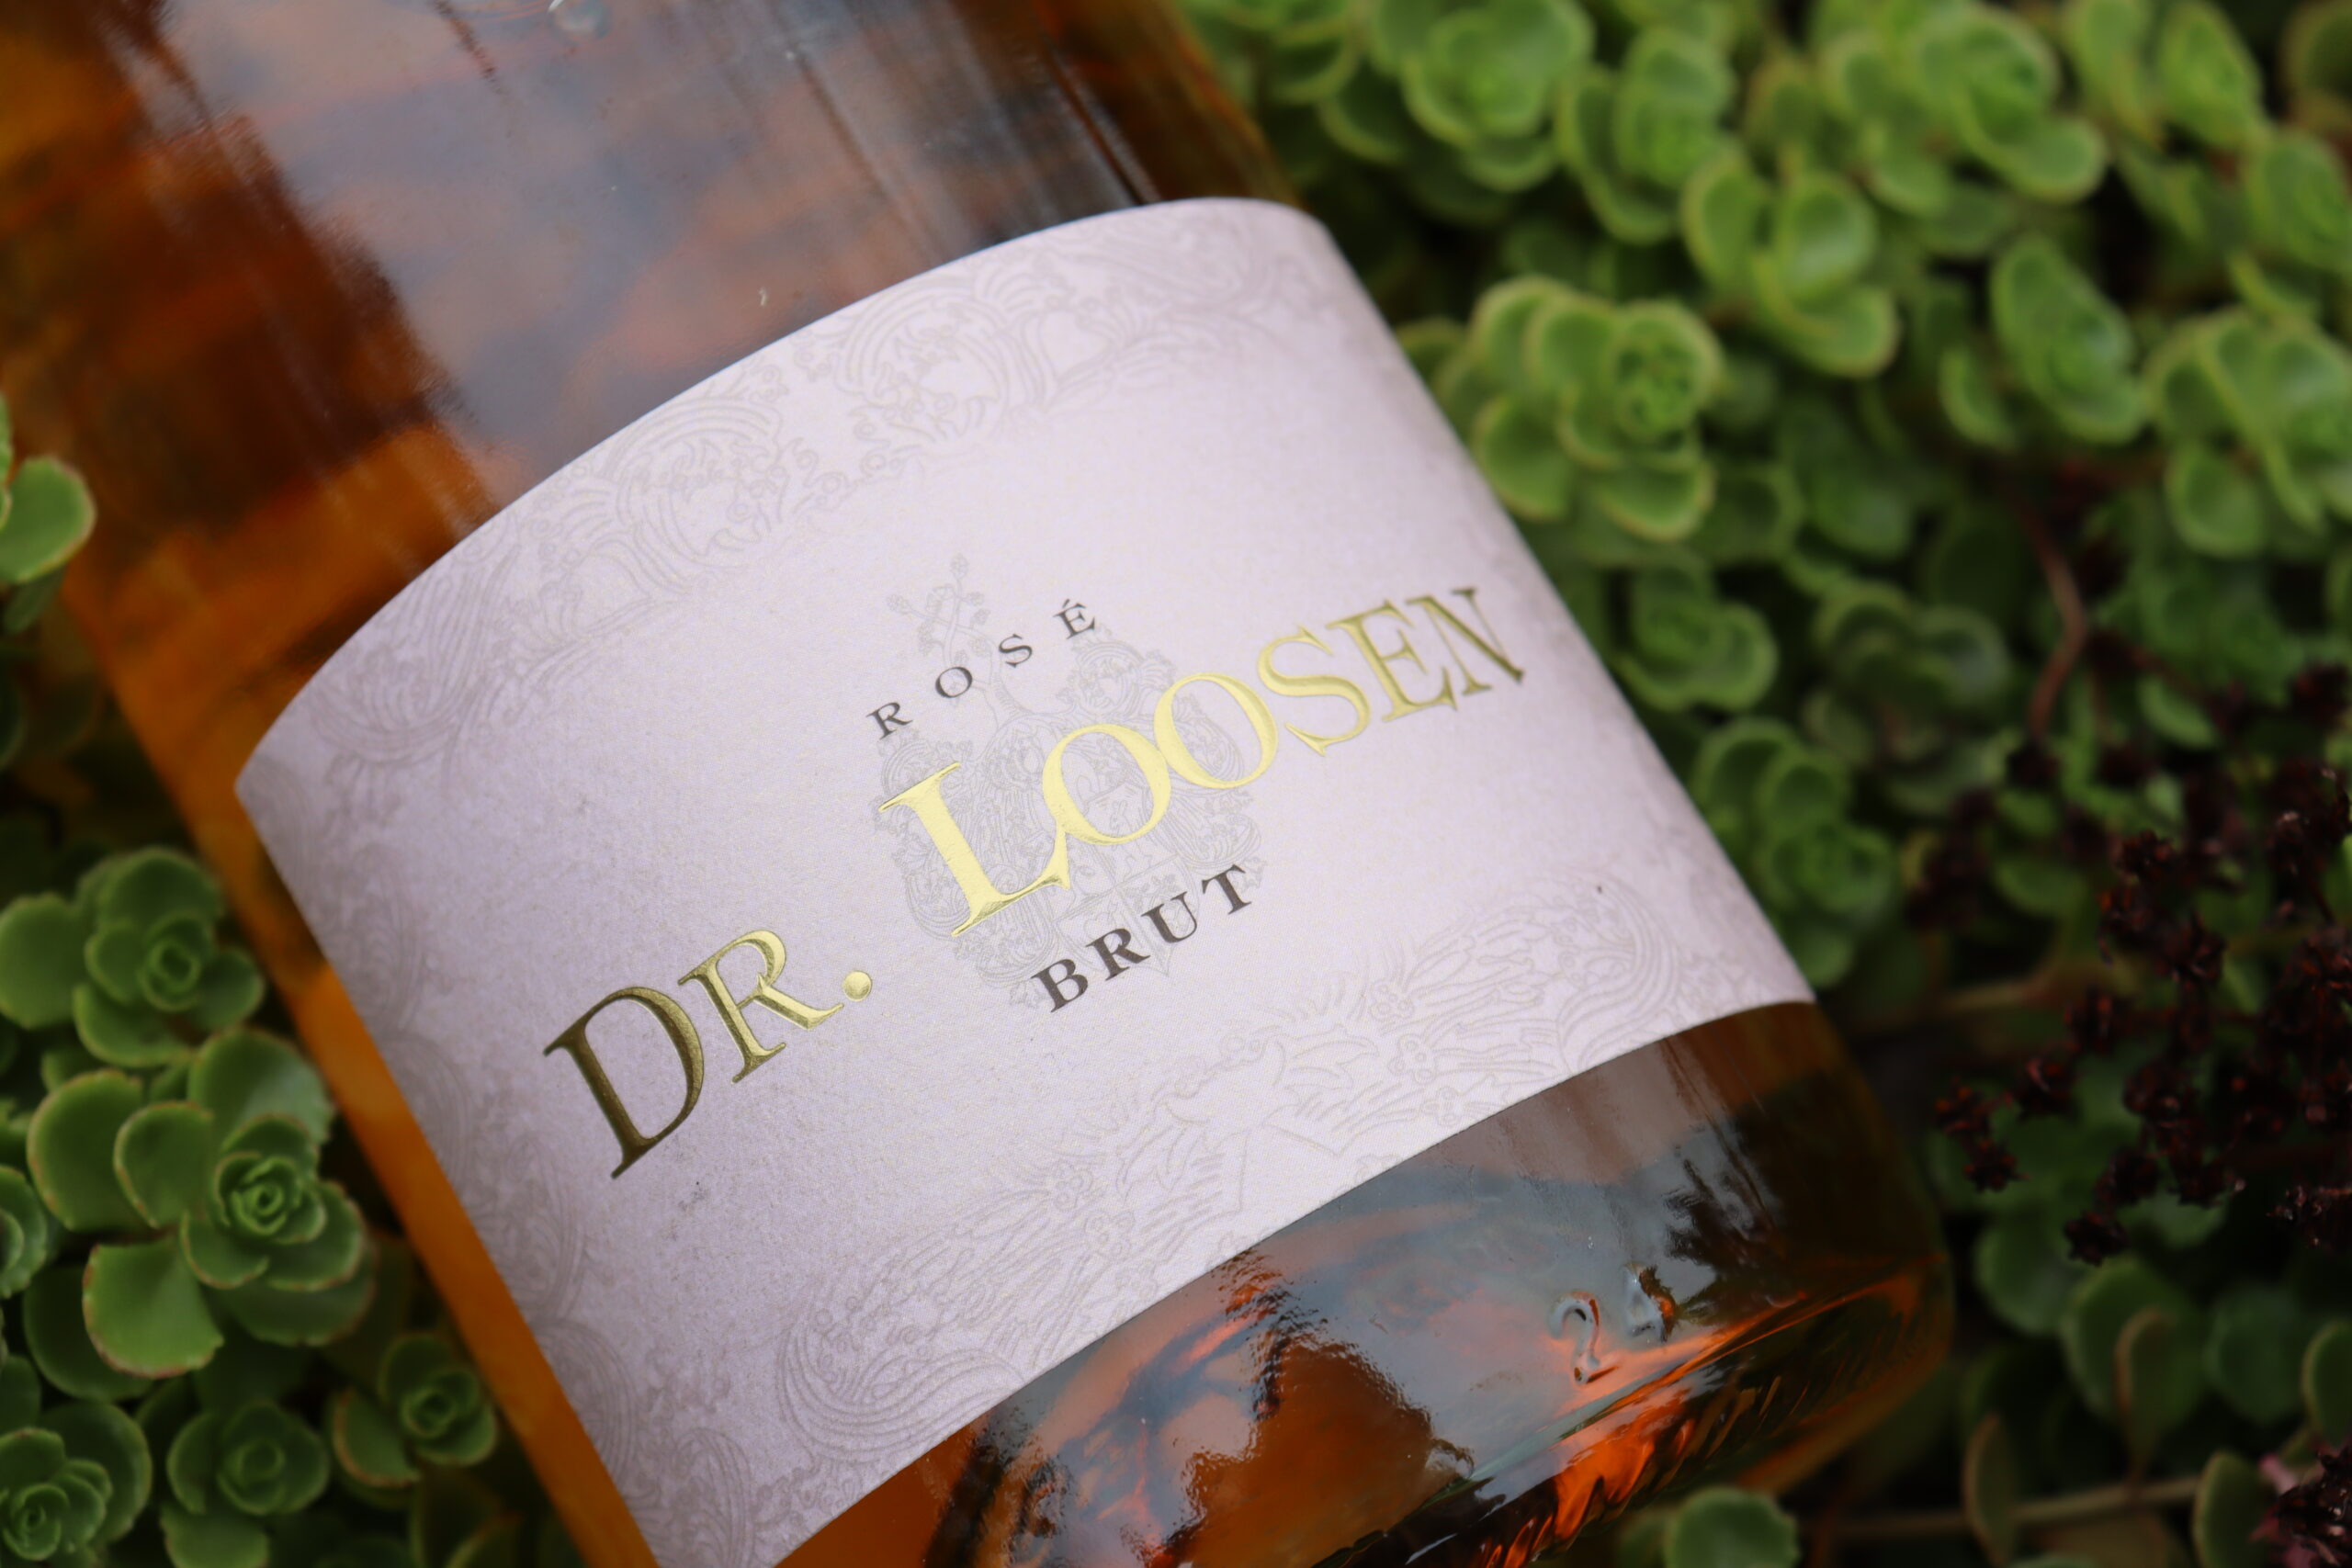 Sip, Sip, Rosé! Wines in Bloom for February  – Loosen Bros. USA Monthly Newsletter